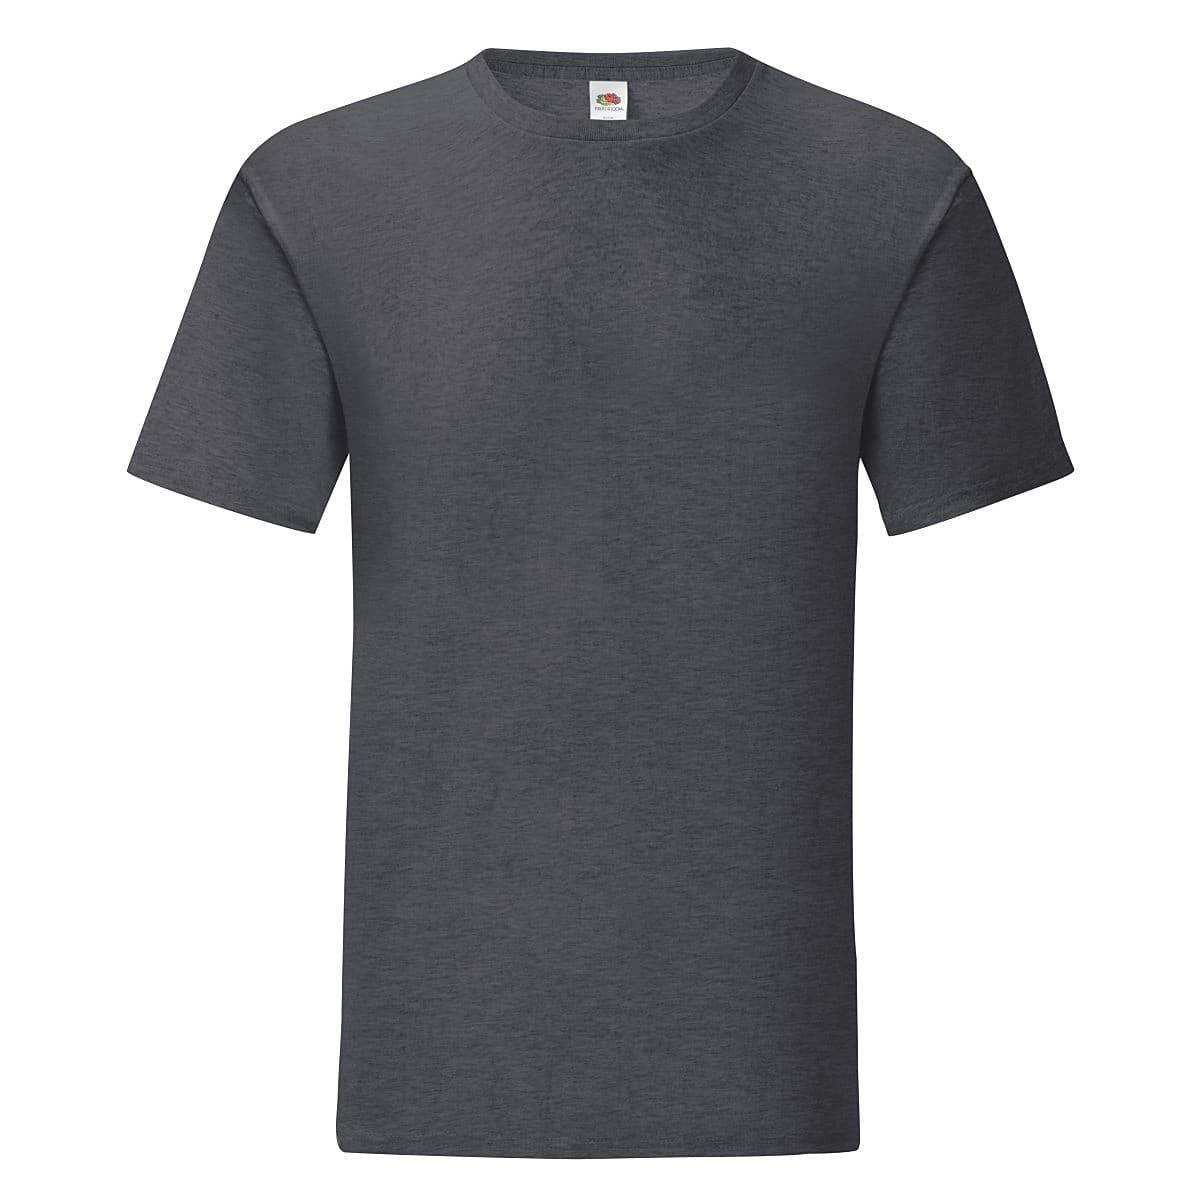 Fruit Of The Loom Mens Iconic T-Shirt in Dark Heather (Product Code: 61430)